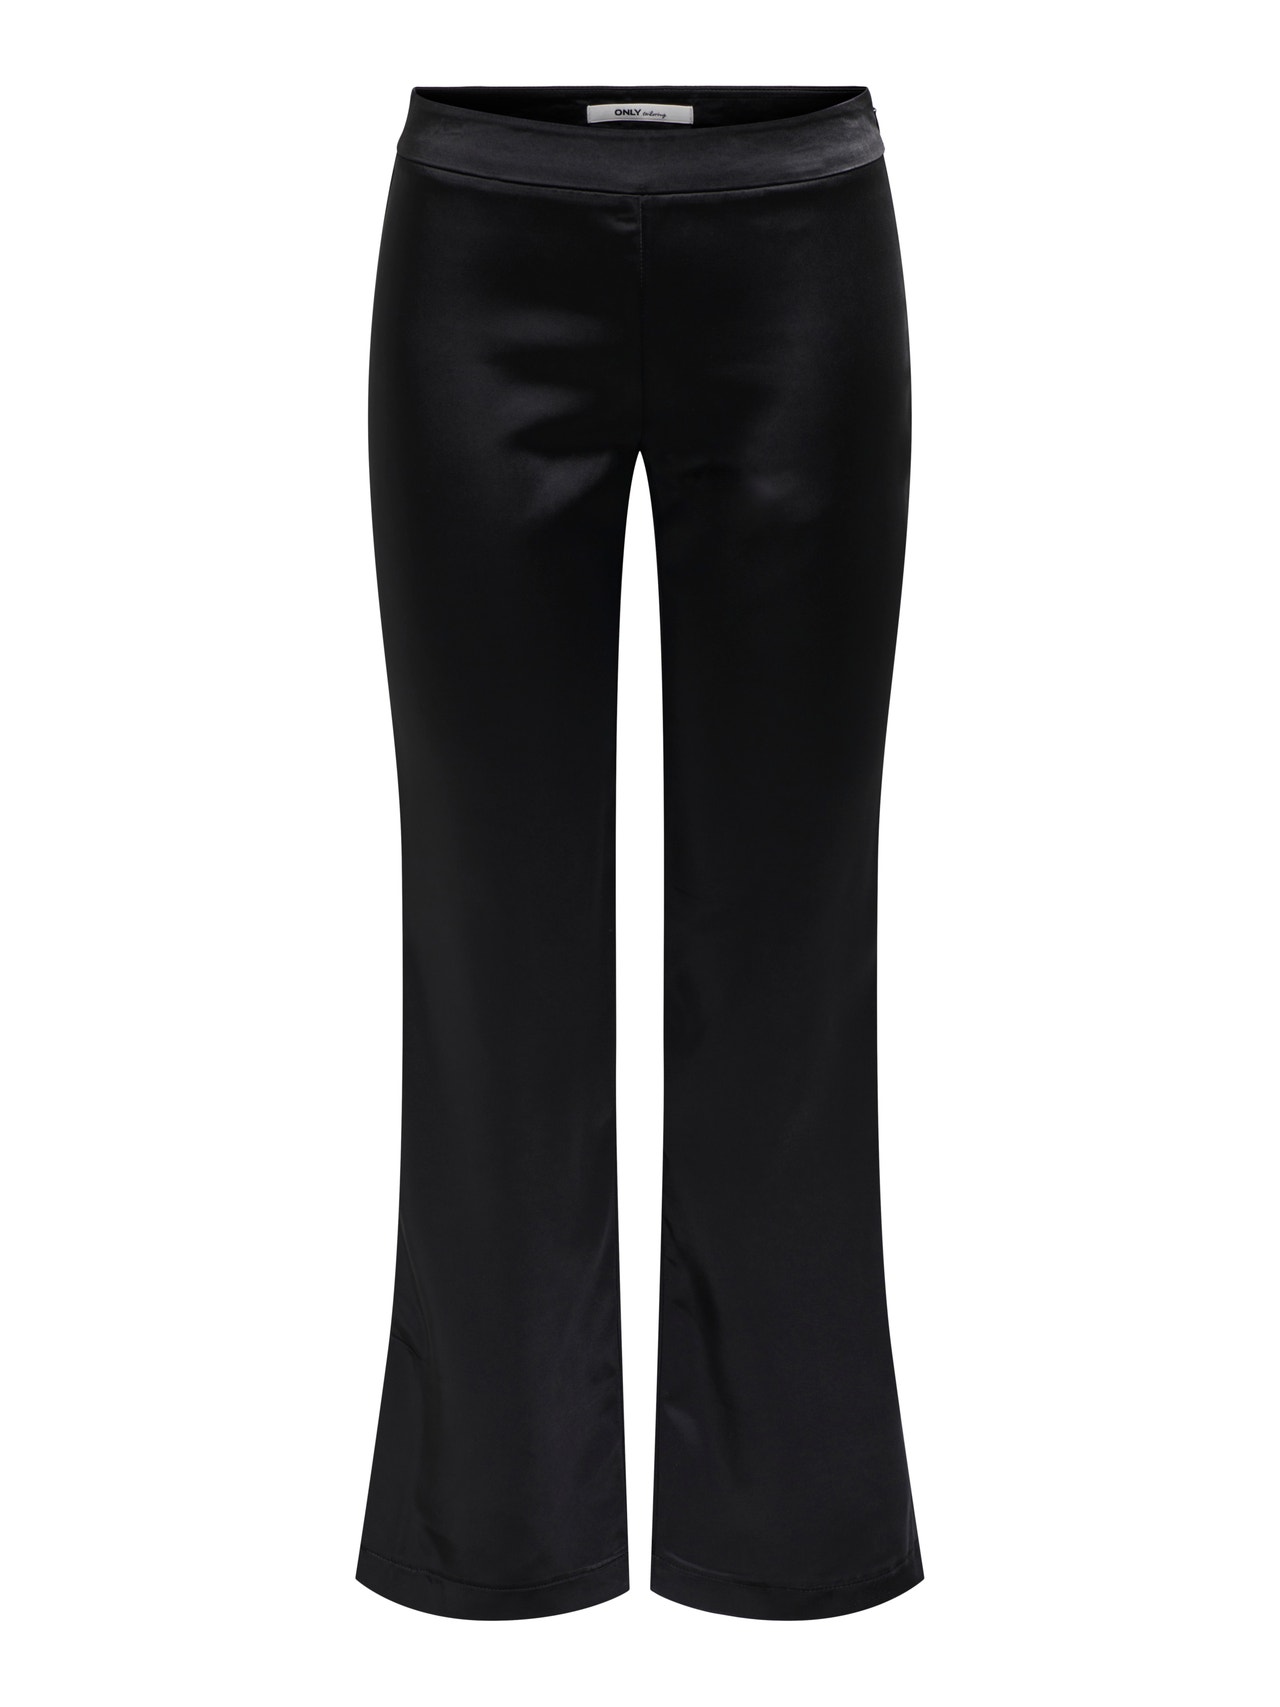 ONLY Mid Waist Flared Slit Trousers -Black - 15275725